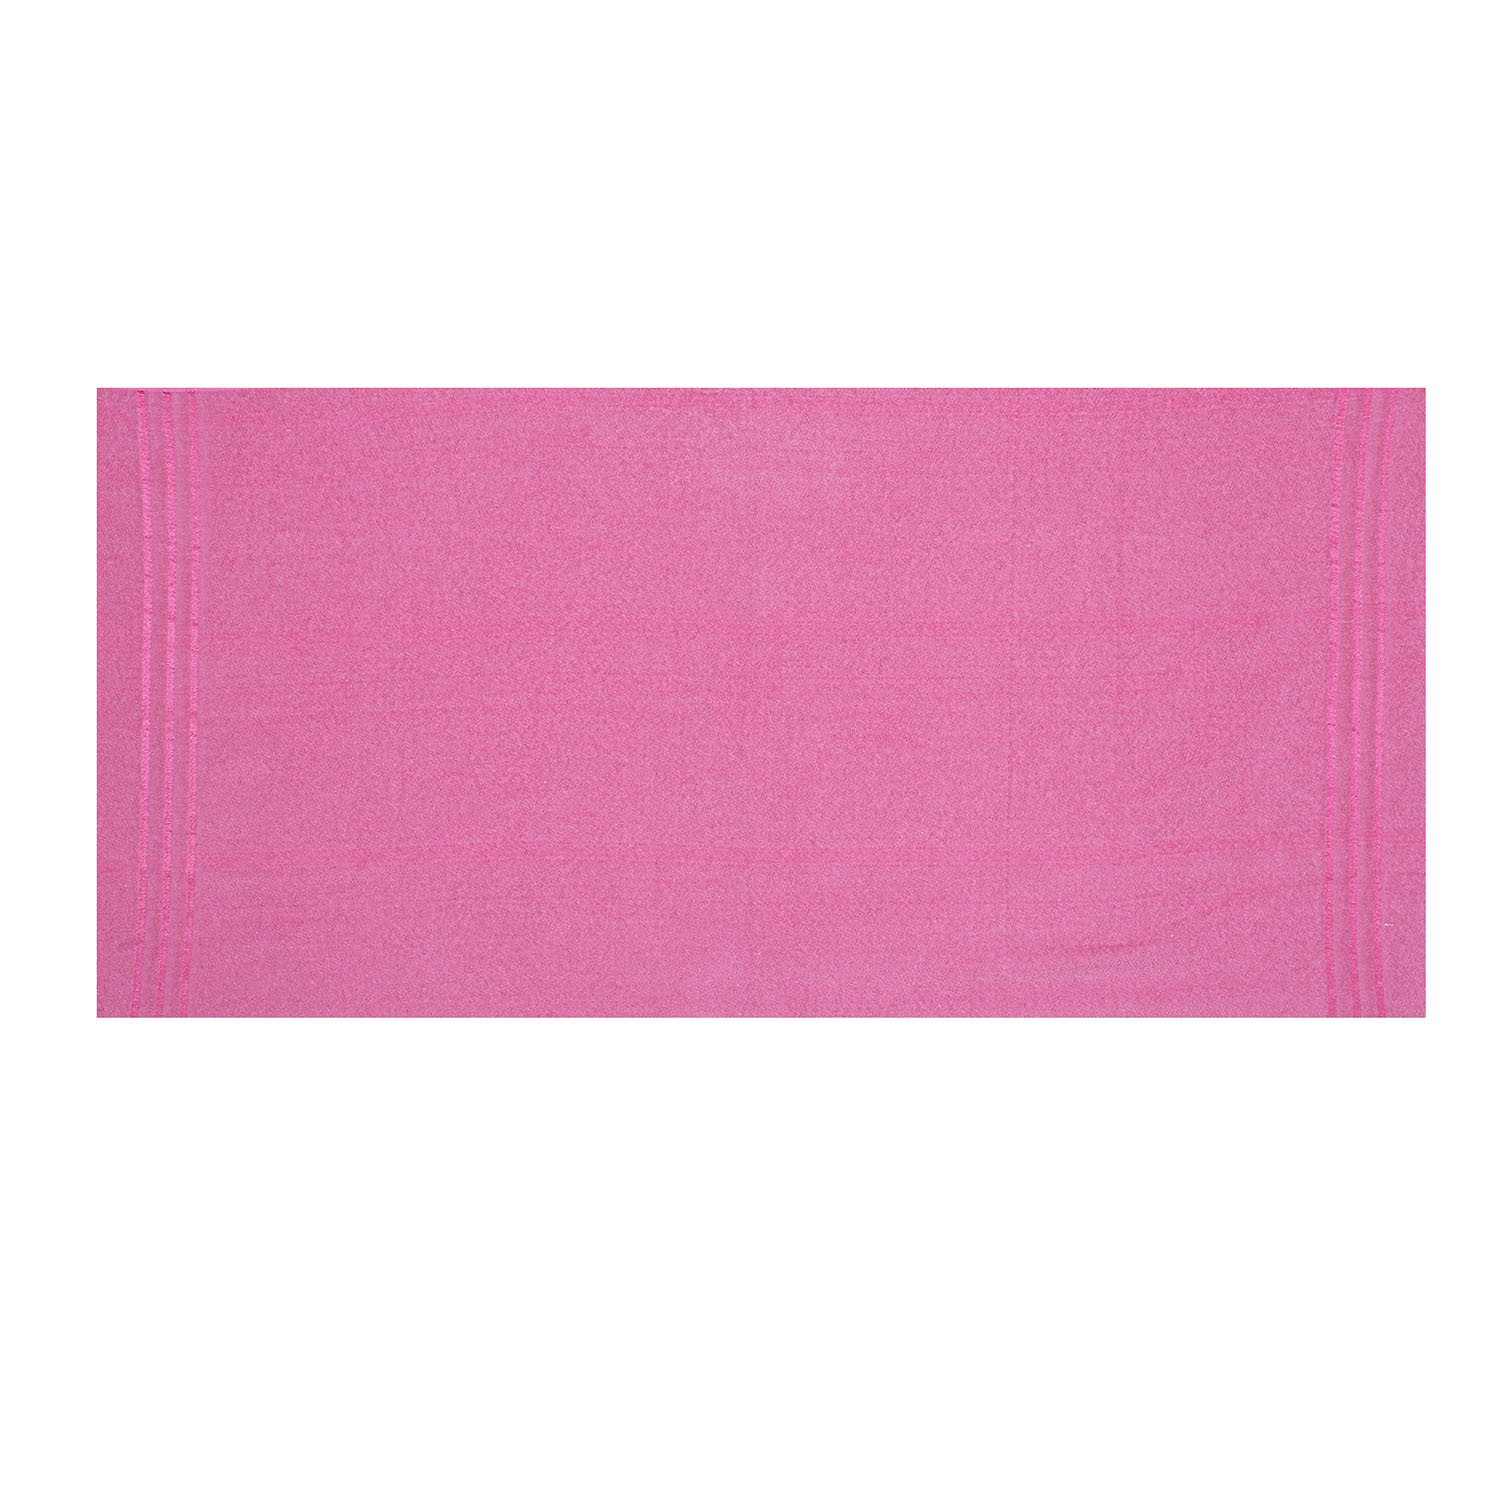 Kuber Industries Cotton Super Absorbent Bath Towel|Anti-Bacterial & Quick Dry Towel for Bath,Beach,Yoga,Fluffy,(Pink,Large)